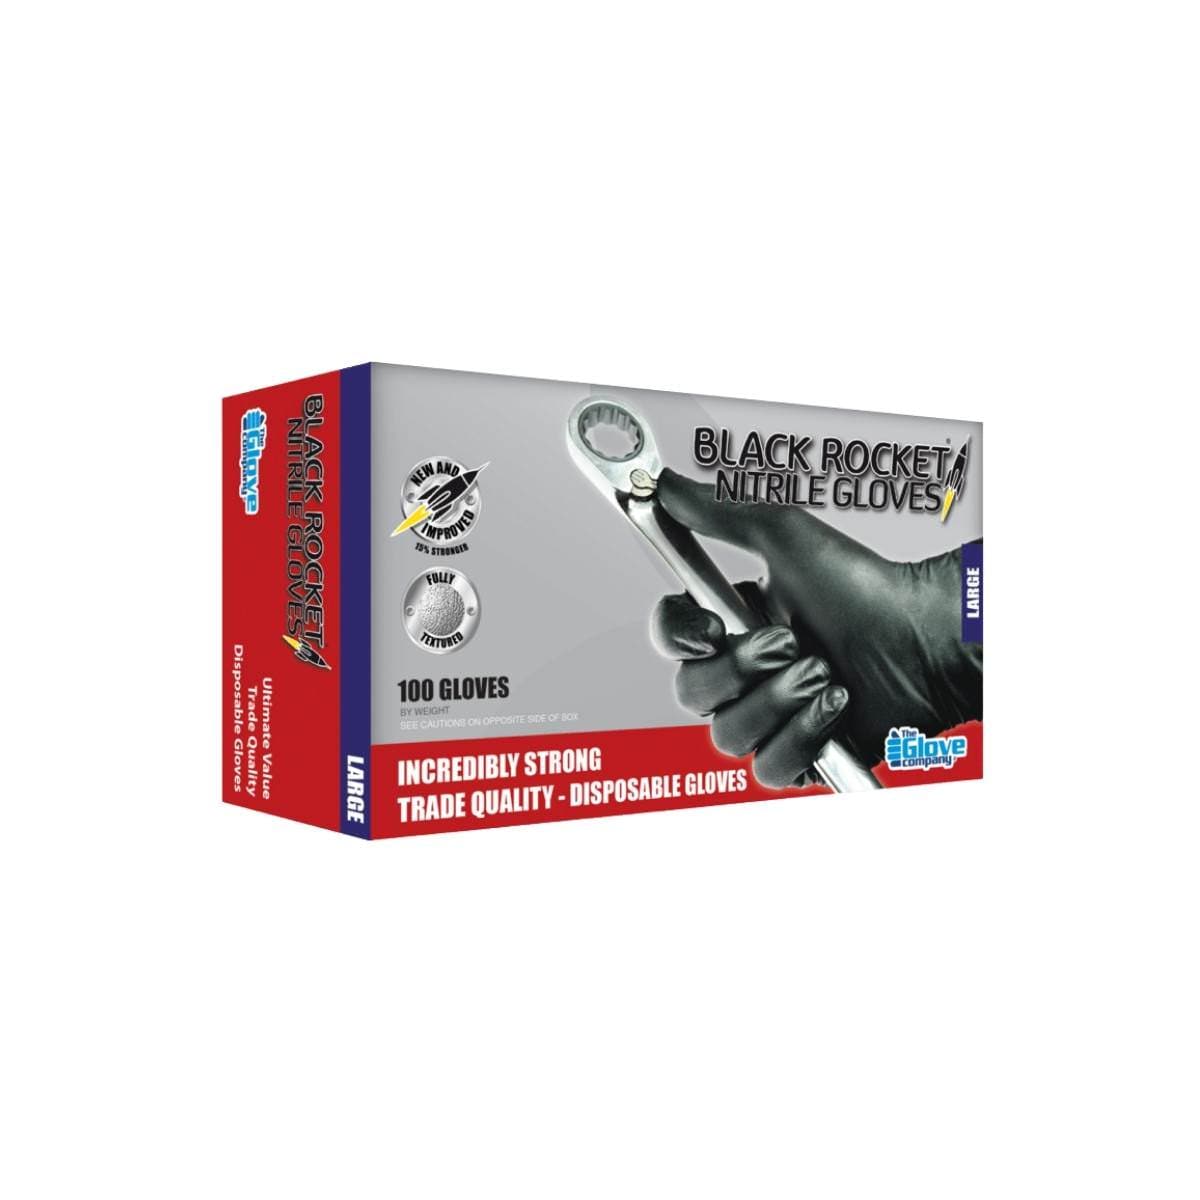 Ultra Z-GRIP Gray Proprietary Foam A4 Cut Resistant Gloves (Product # –  Medicine Chest Services